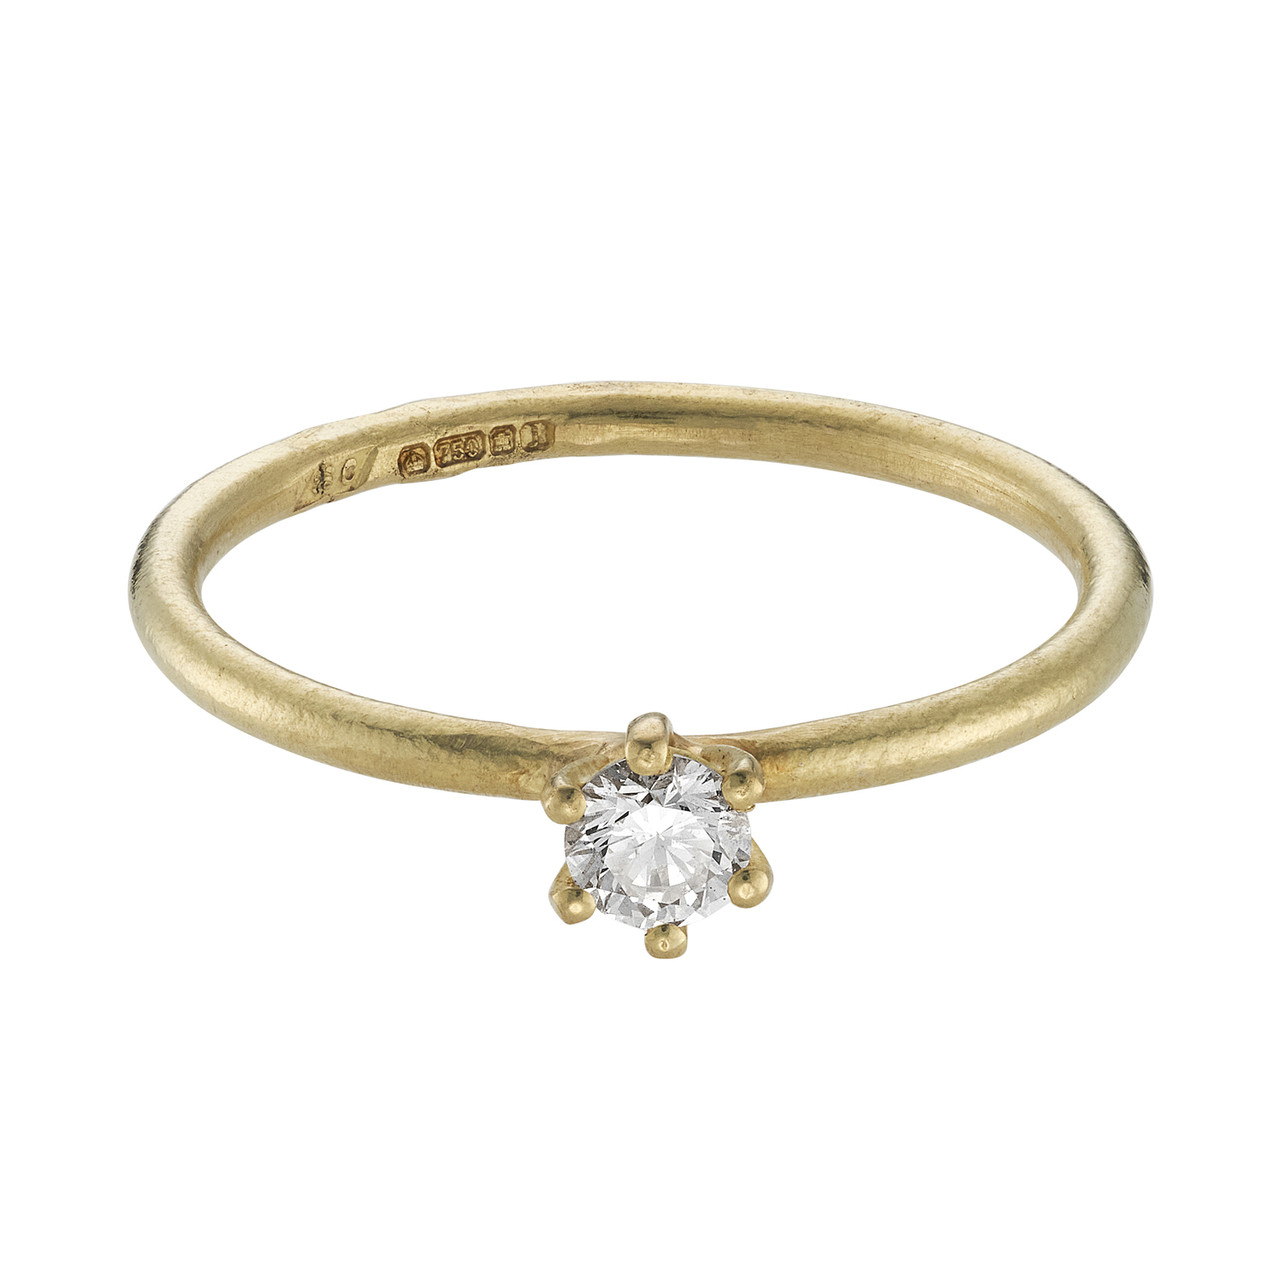 3.5mm Champagne Diamond & Gold Claw Set Engagement Ring, Shimara Carlow, tomfoolery